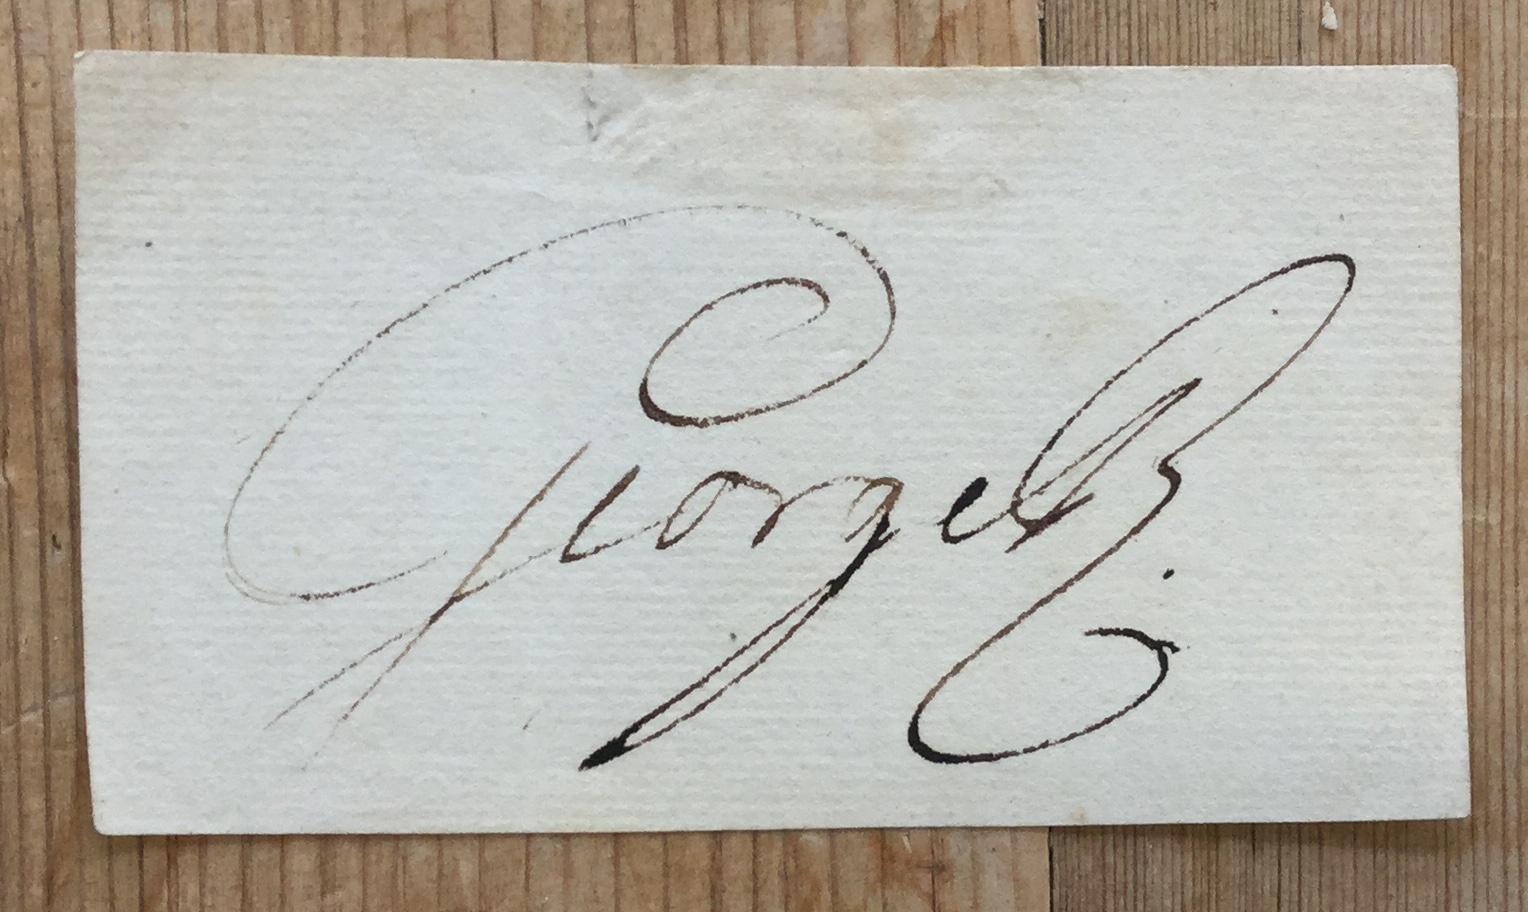 A superb ink signature from celebrated British king George III (1738-1820). 
King George III reigned for just under 60 years between 1760 to 1820. 

His reign saw an expansion of the British Empire, as well as the loss of its North American